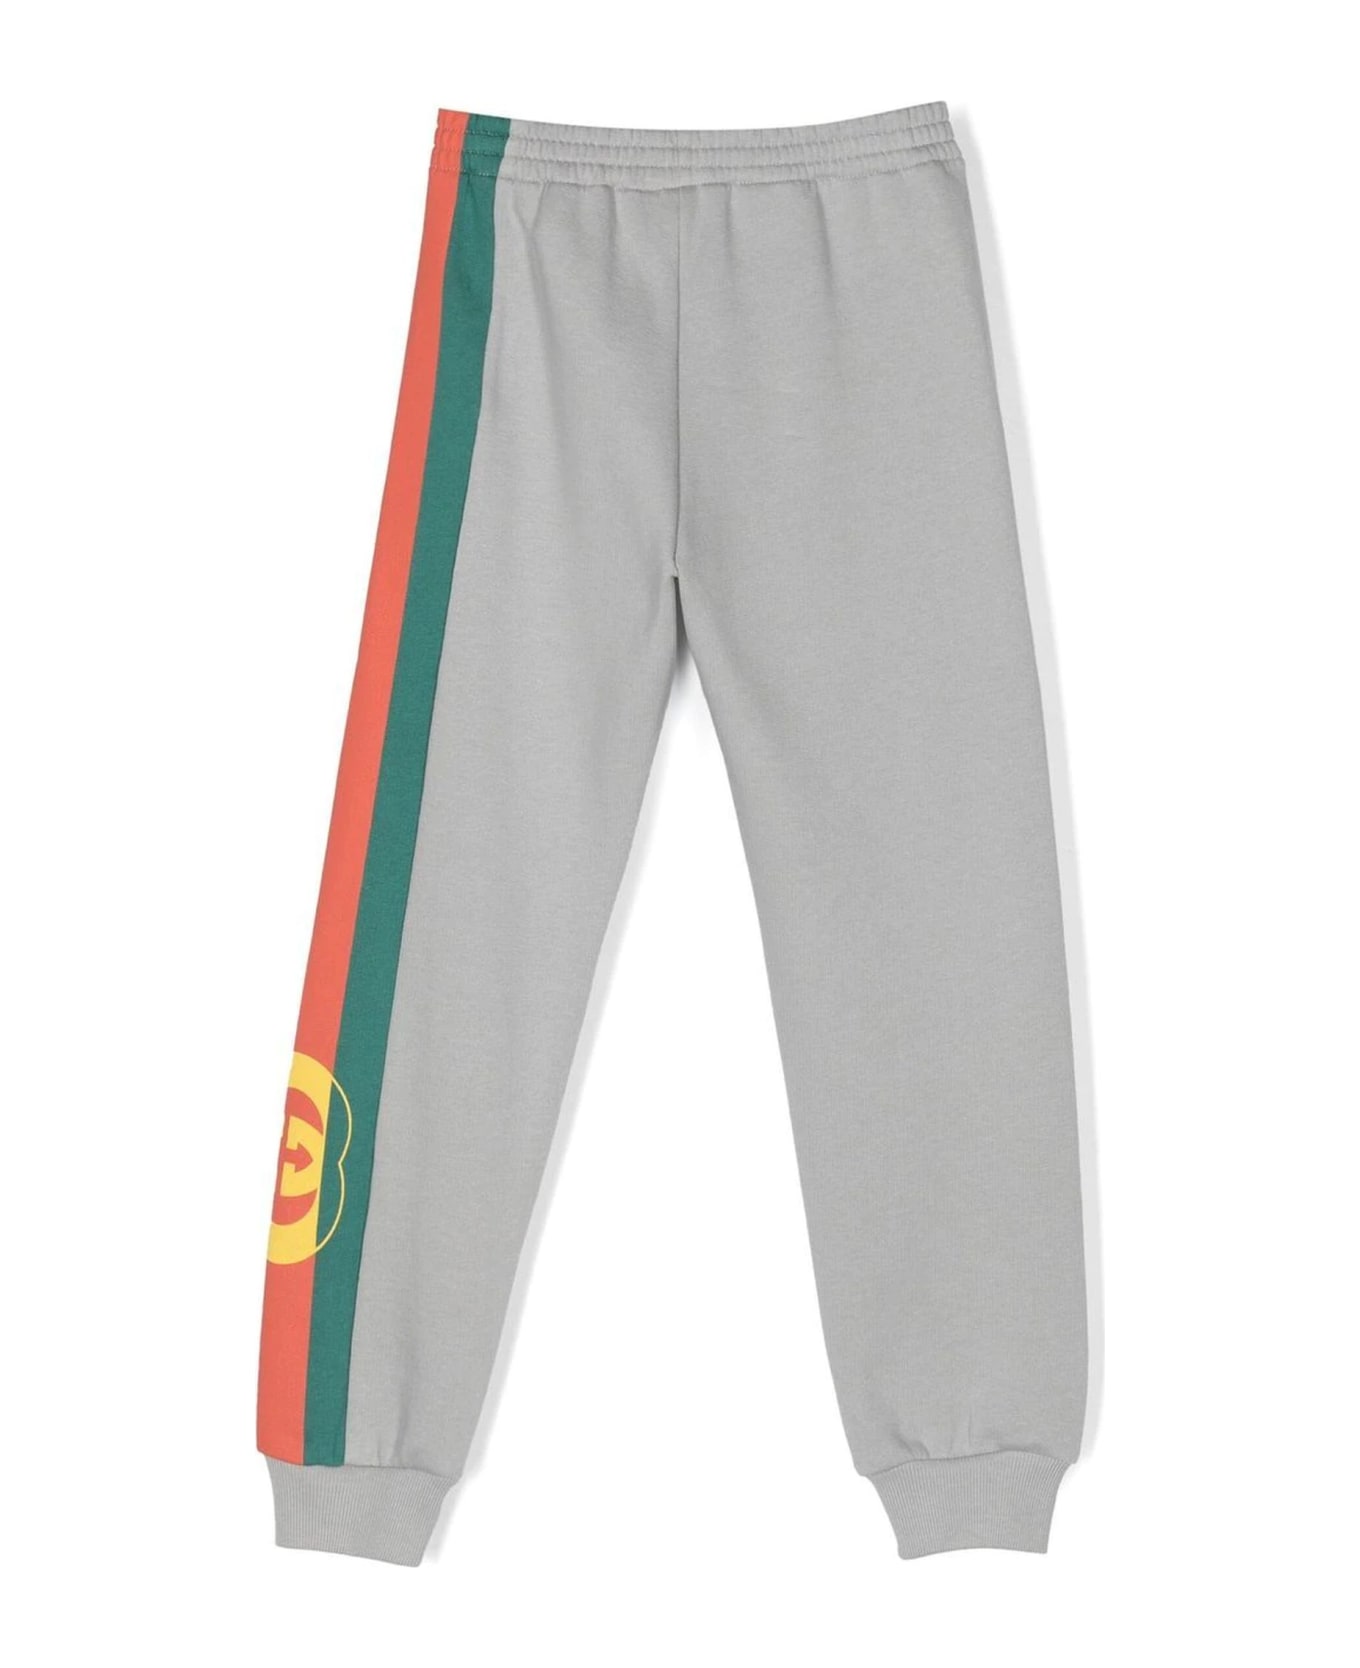 Gucci Grey Cotton Track Pants - Thunderstorm ボトムス